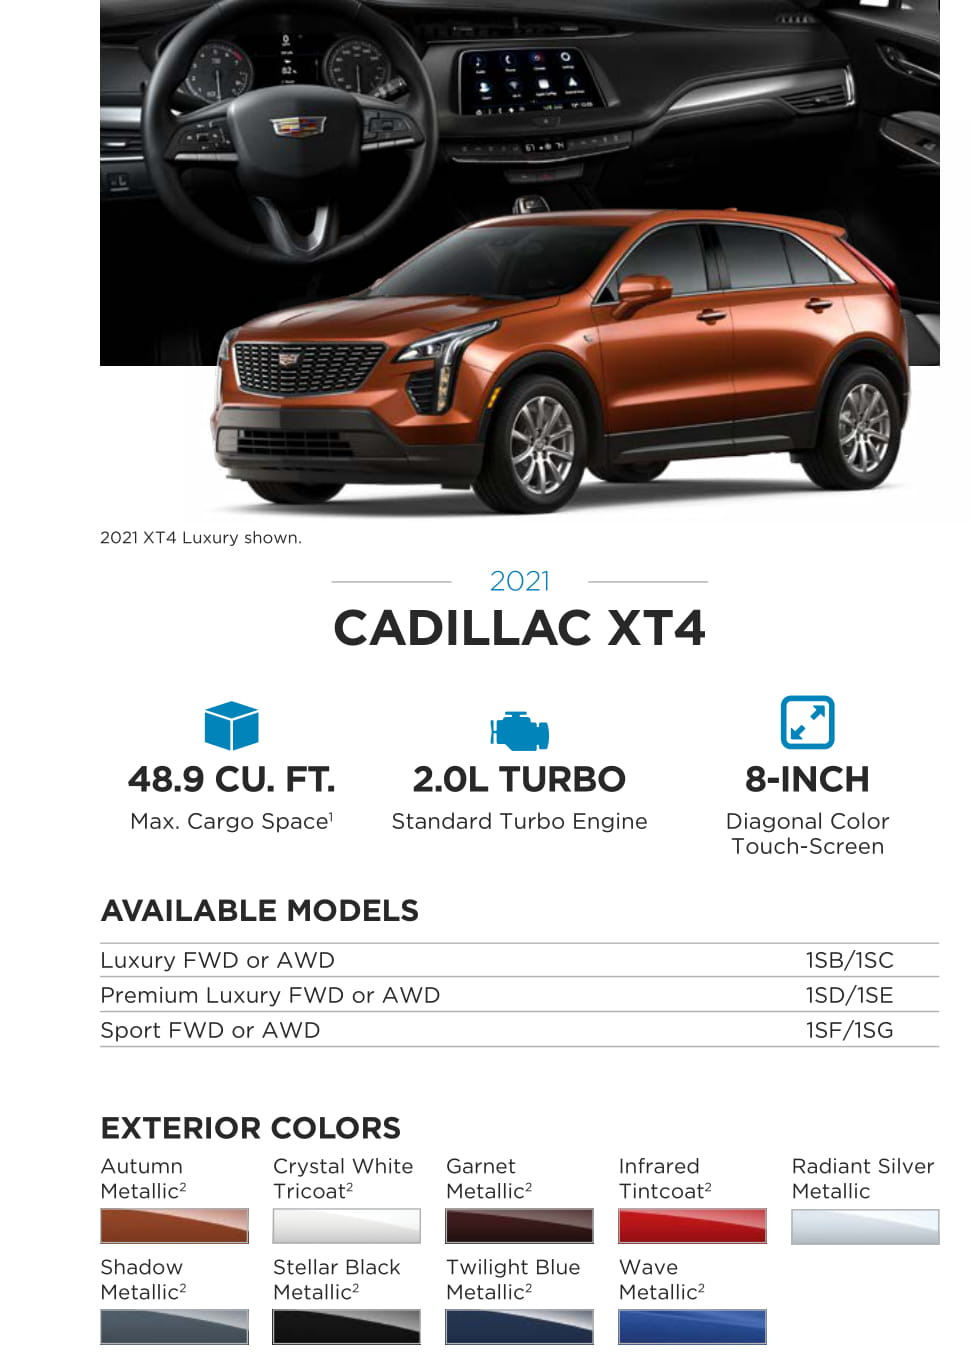 Exterior Colors used on this model Cadillac in 2021